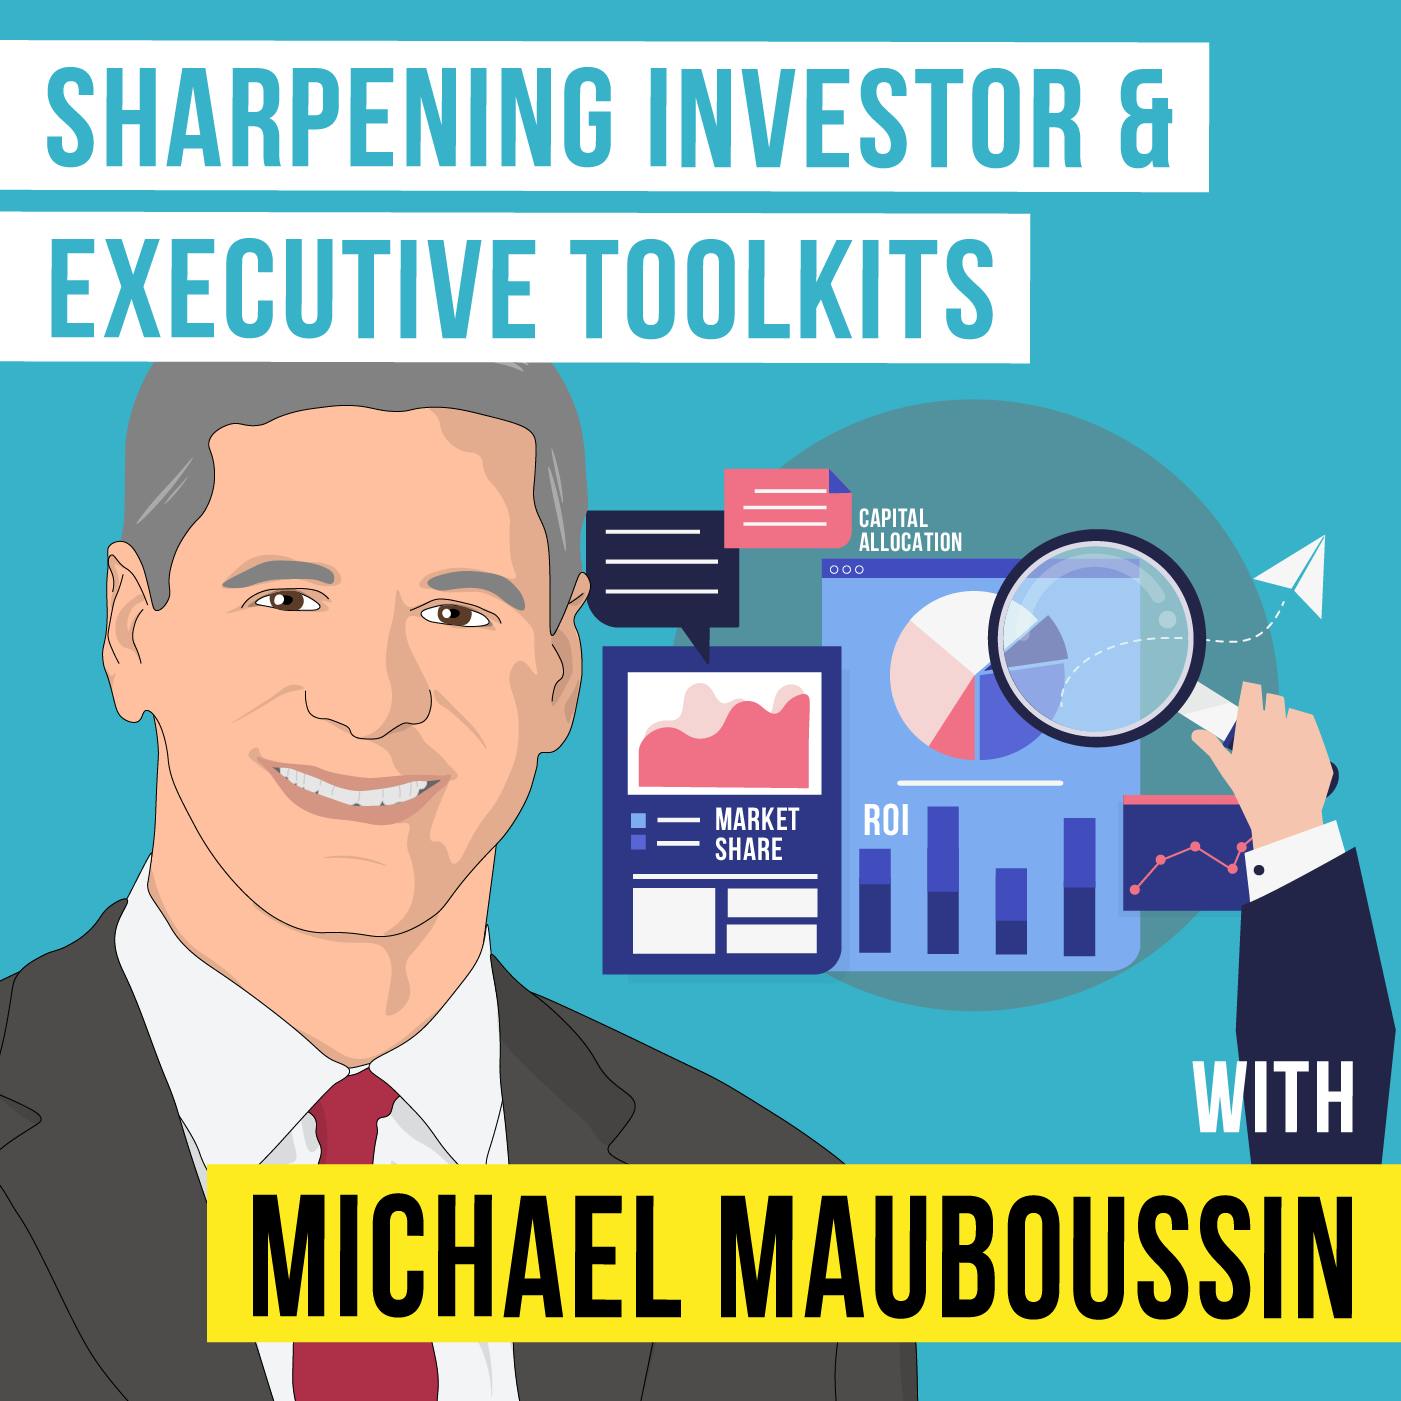 Michael Mauboussin - Sharpening Investor & Executive Toolkits - [Invest Like the Best, EP.308]